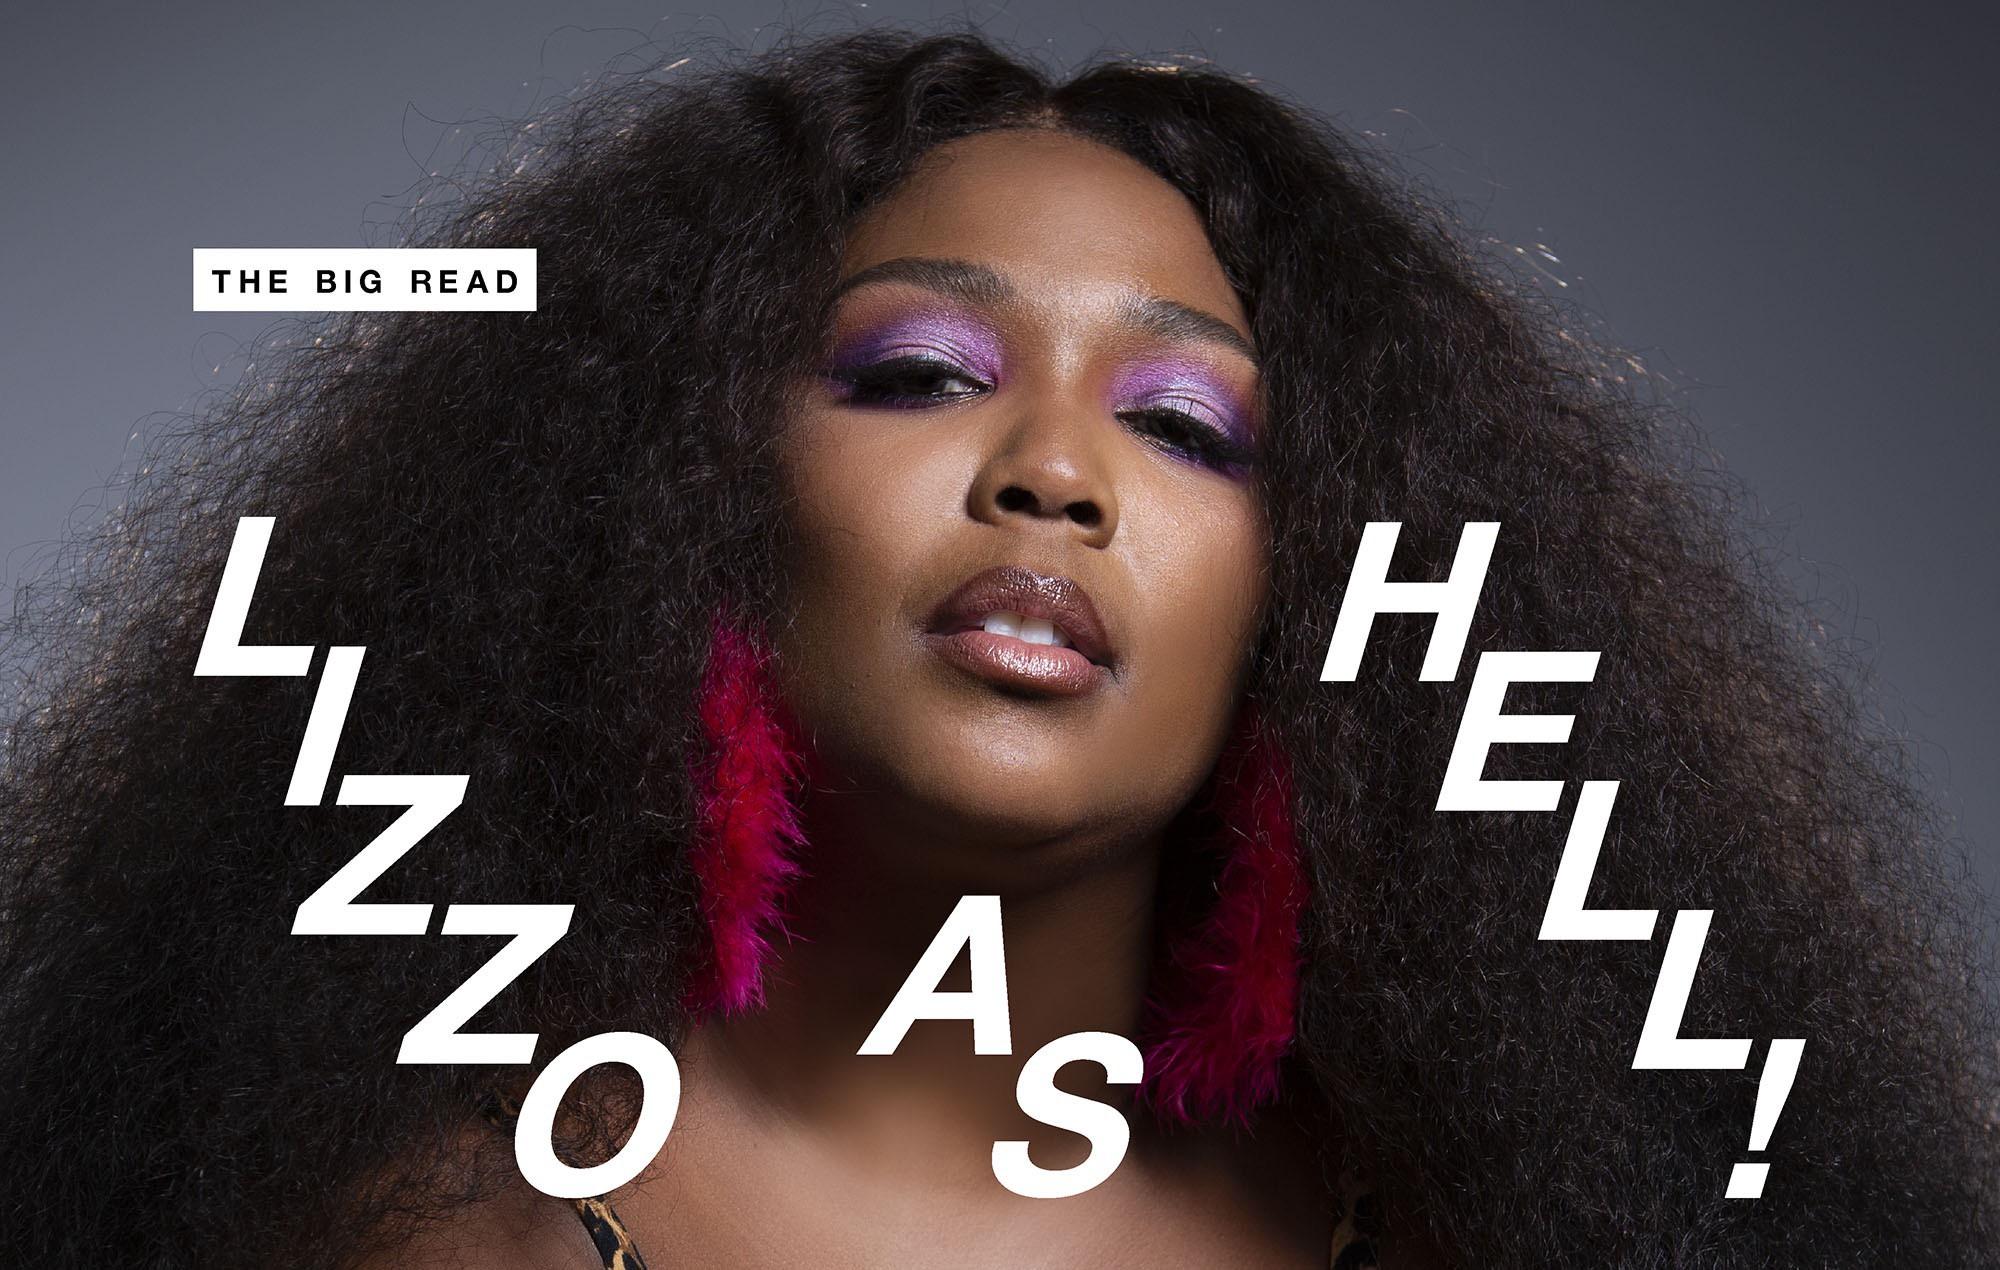 NME Big Read: Lizzo reveals she's a bad bitch